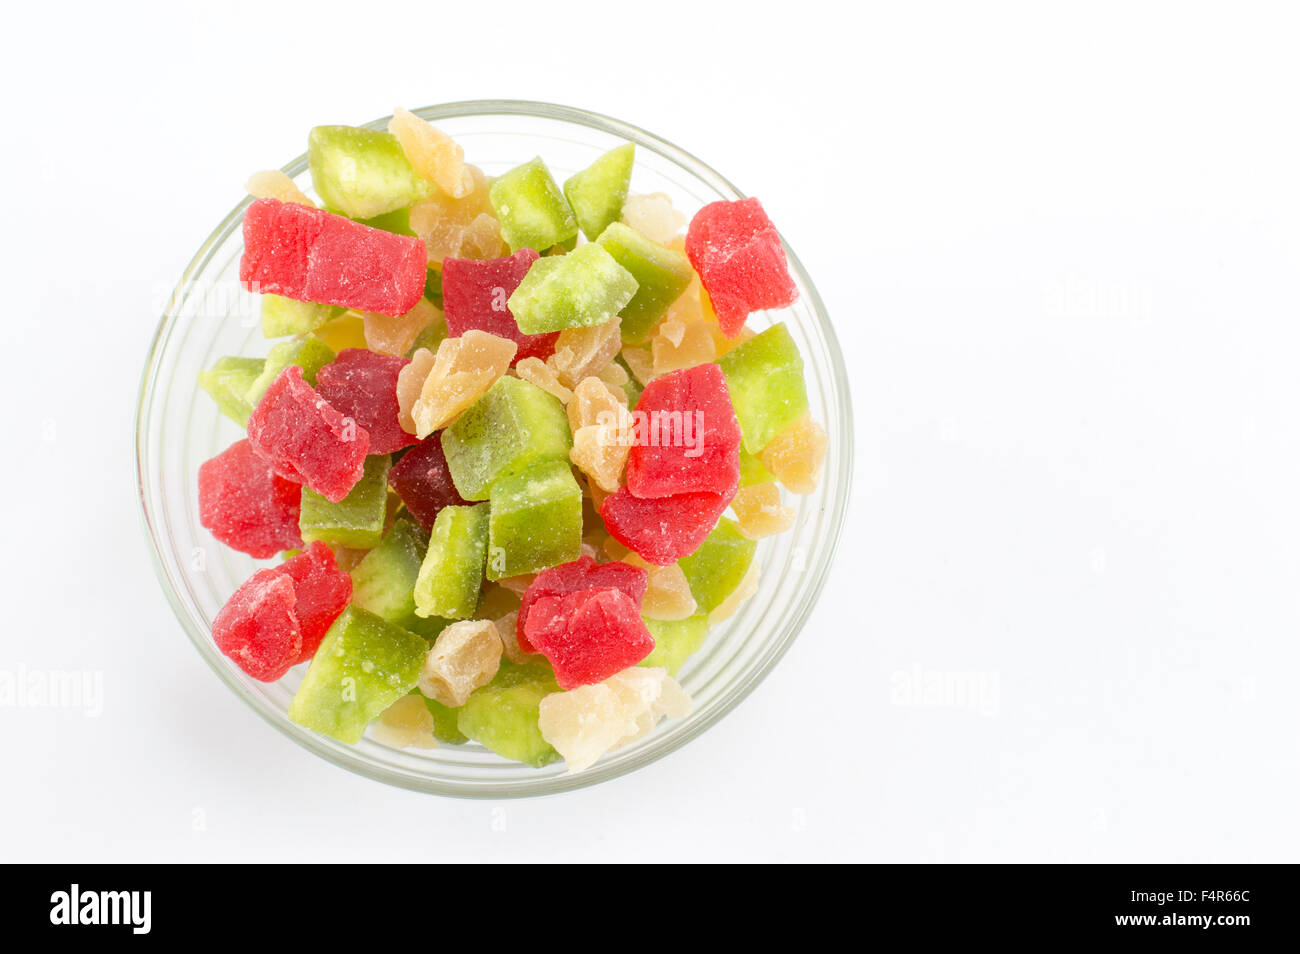 Dried fruit in a bowl on white Stock Photo